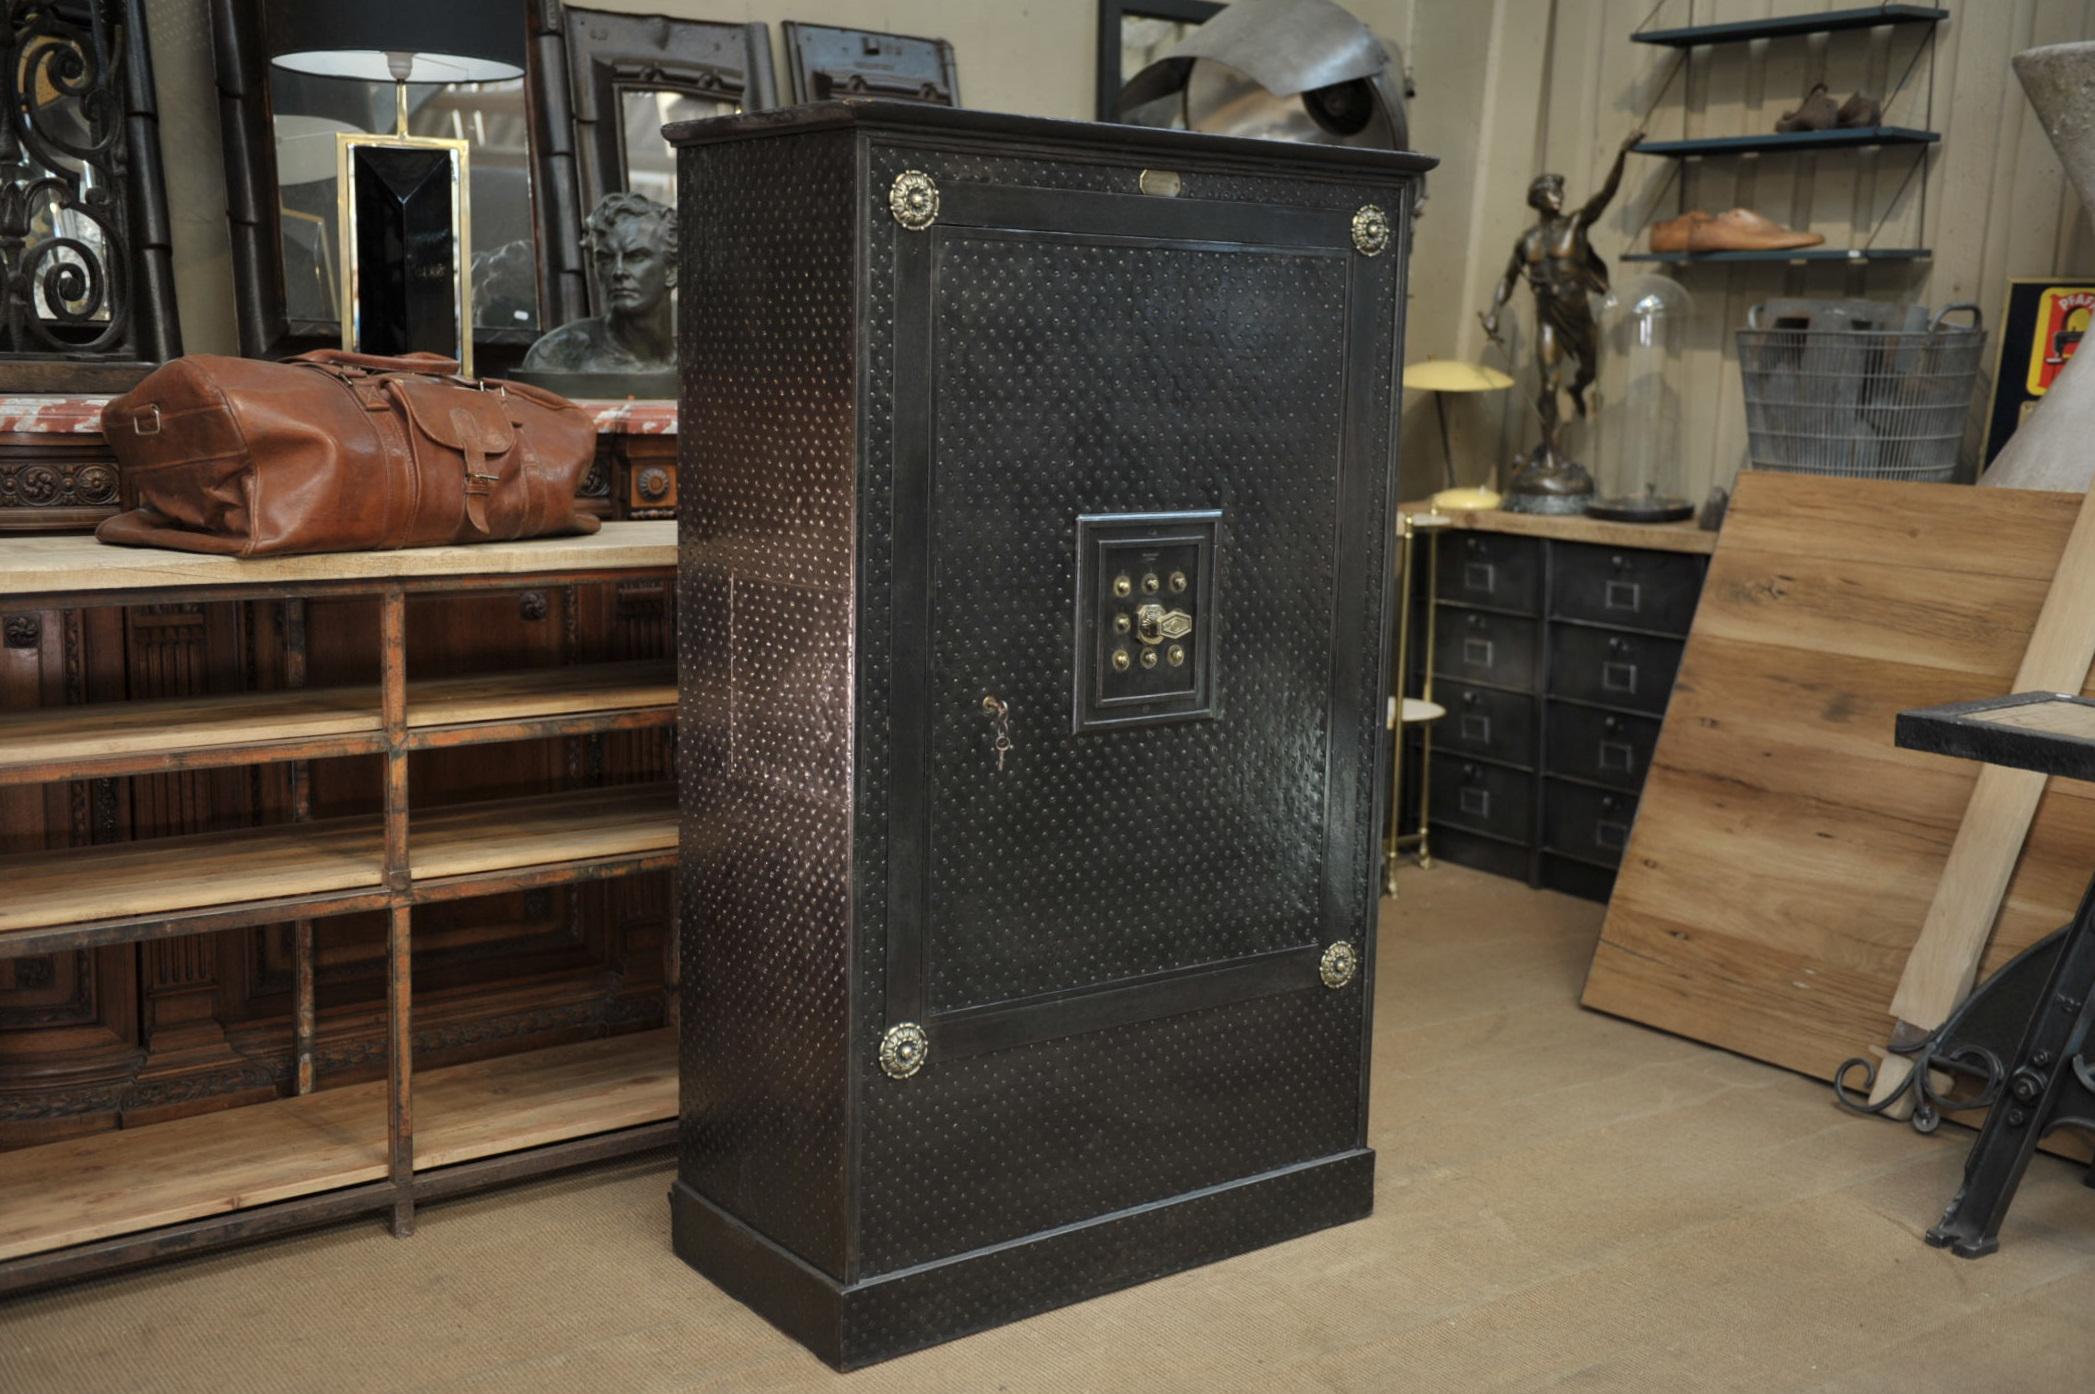 Exceptional safe cabinet printed and brass tag GANGNEBIEN PARIS with original keys and code, circa late 19th century.